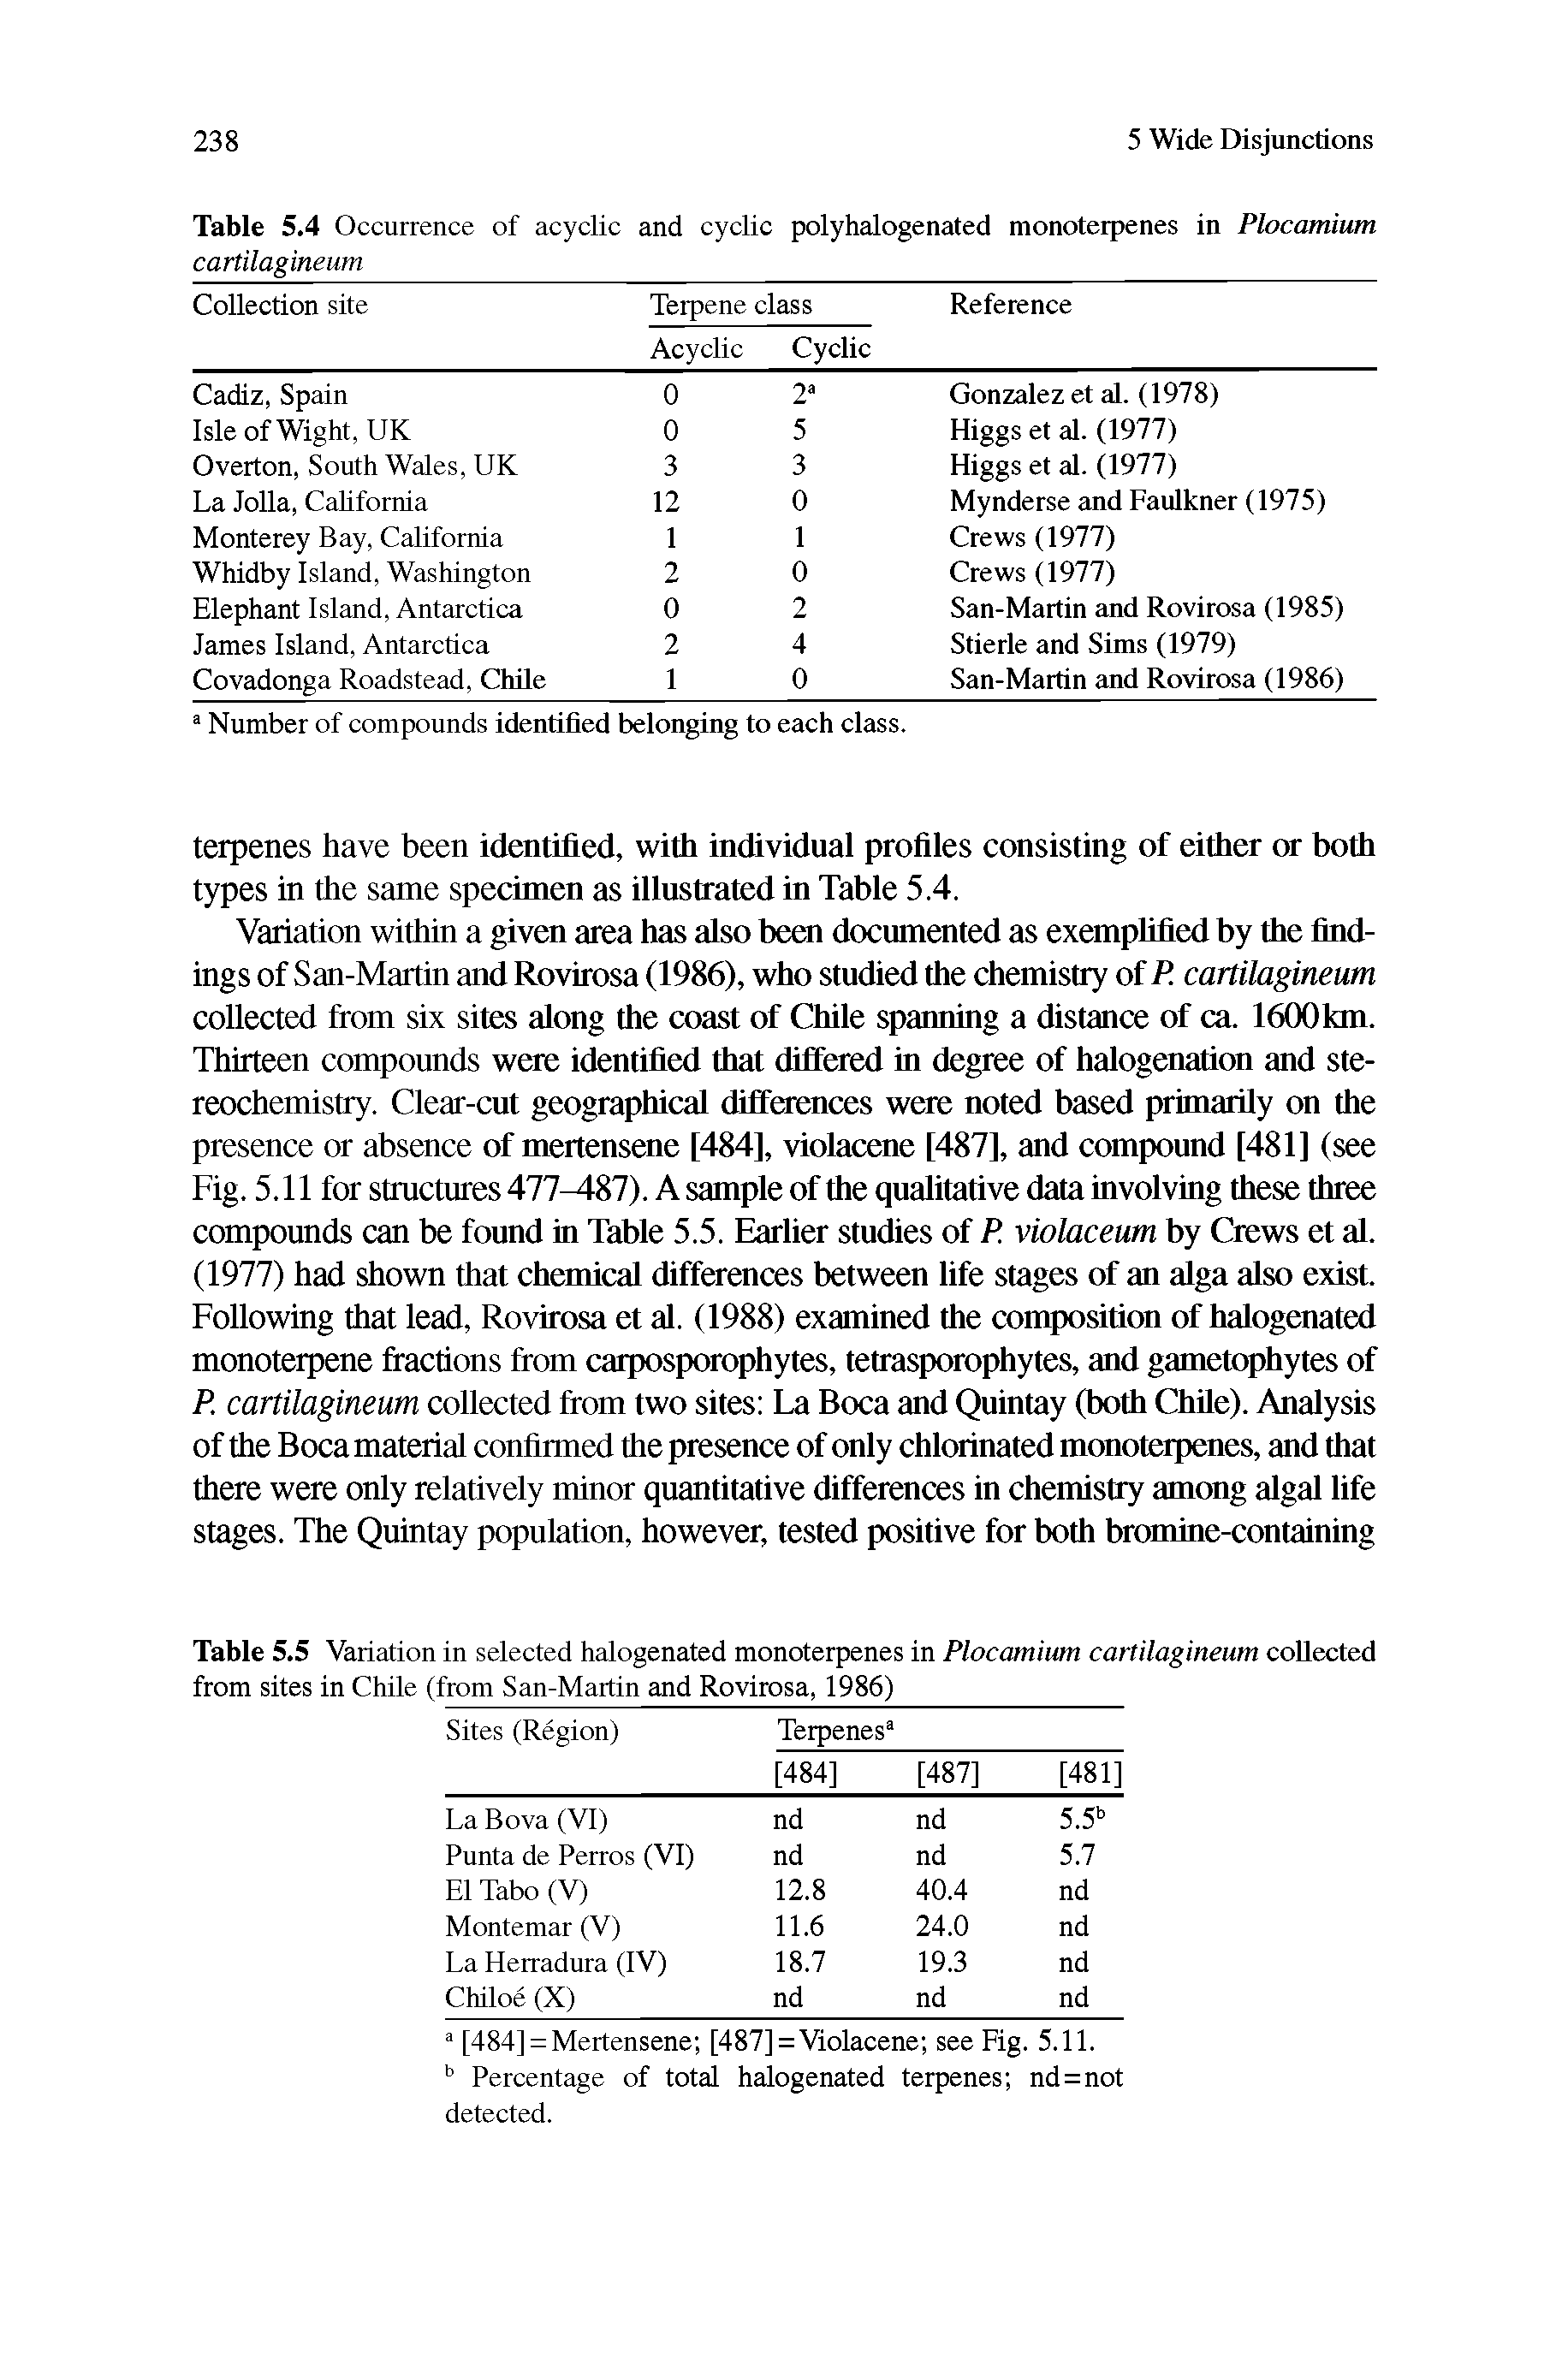 Table 5.5 Variation in selected halogenated monoterpenes in Plocamium cartilagineum coUected from sites in Chile (from San-Martin and Rovirosa, 1986)...